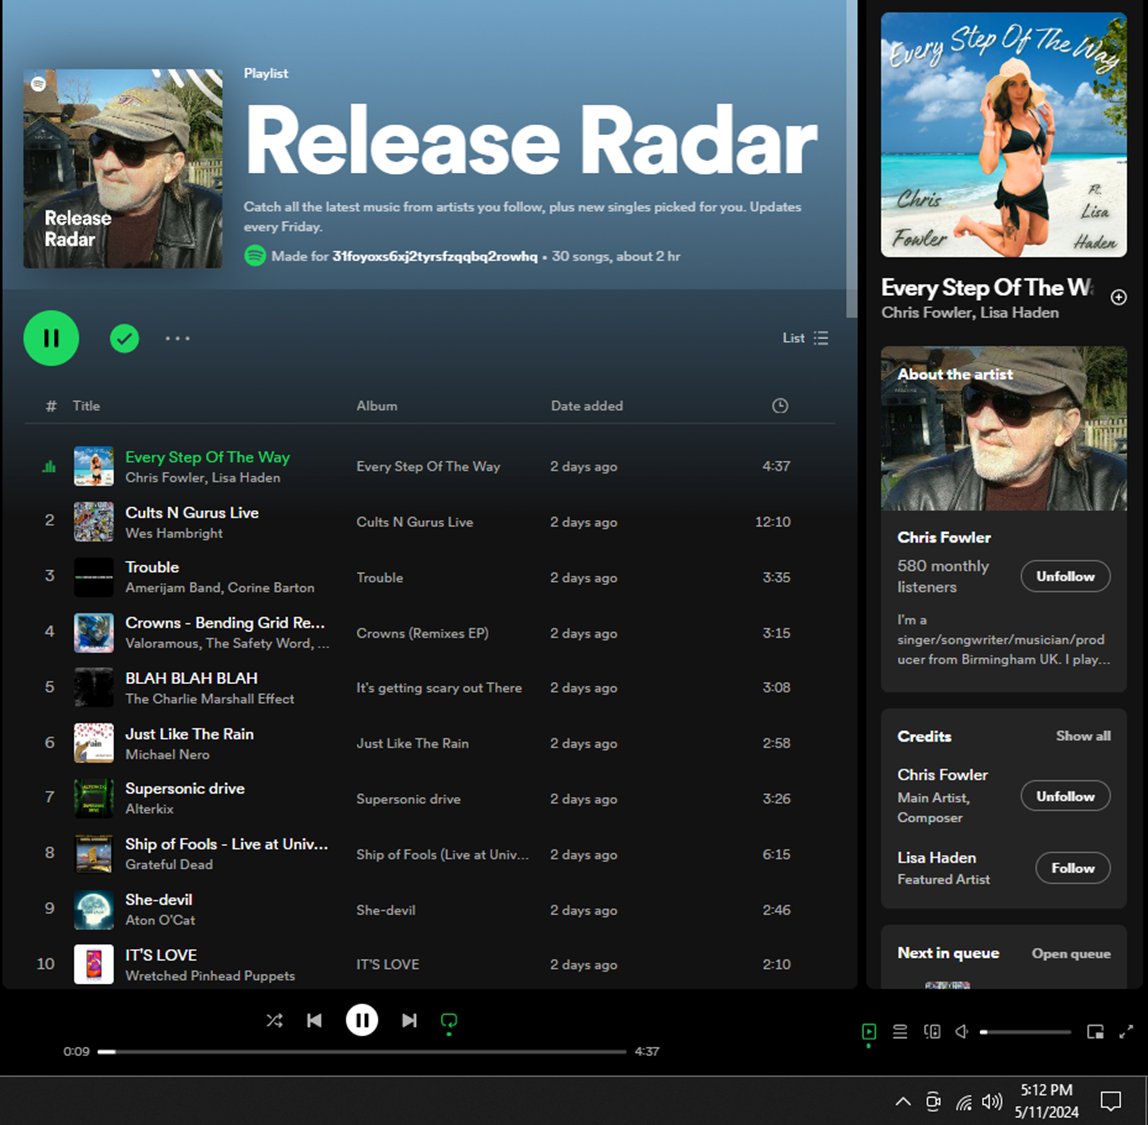 This week's #Spotify #ReleaseRadar has gotta be one of the best I've gotten so far for great #IndieMusic...
@chrisfowlersong @lisamariehaden @orangedogmusic @amerijamband @MikelNero 

FANTASTIC!! ❤️🤘

And it's what's spinning in Pittsburgh...